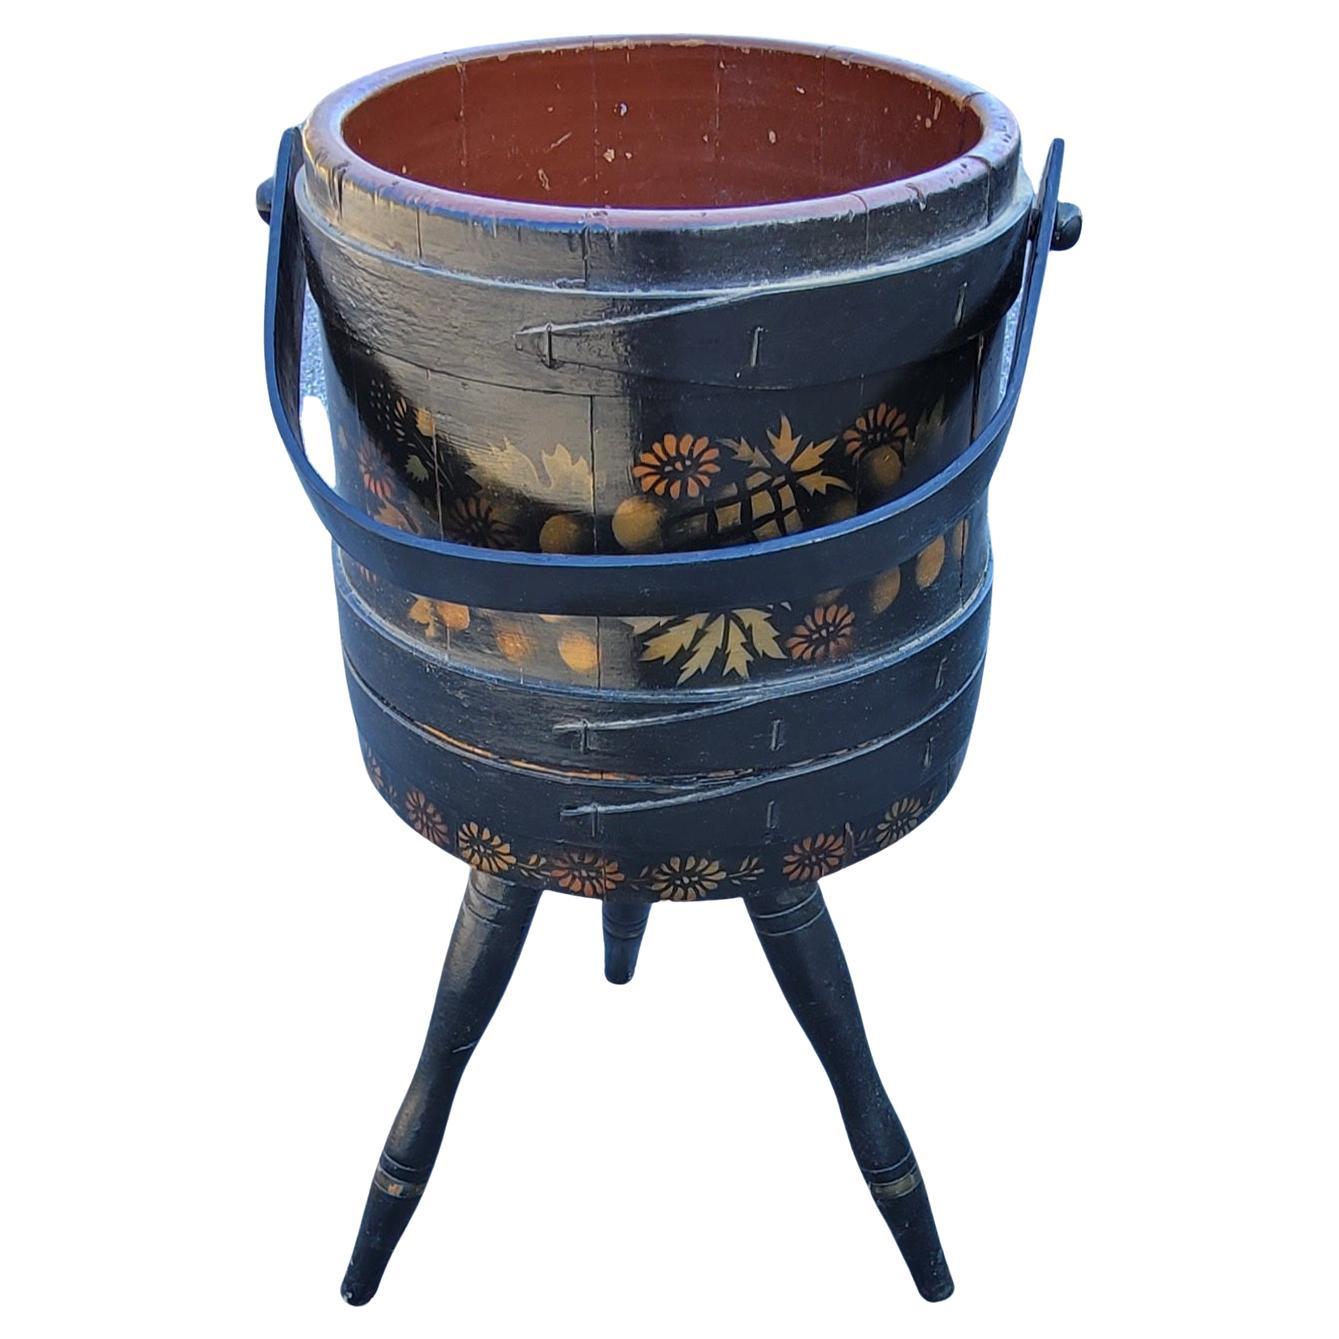 American 1920s Hand-Crafted, Painted and Decorated Tripod Firkin or Sewing Bucket For Sale